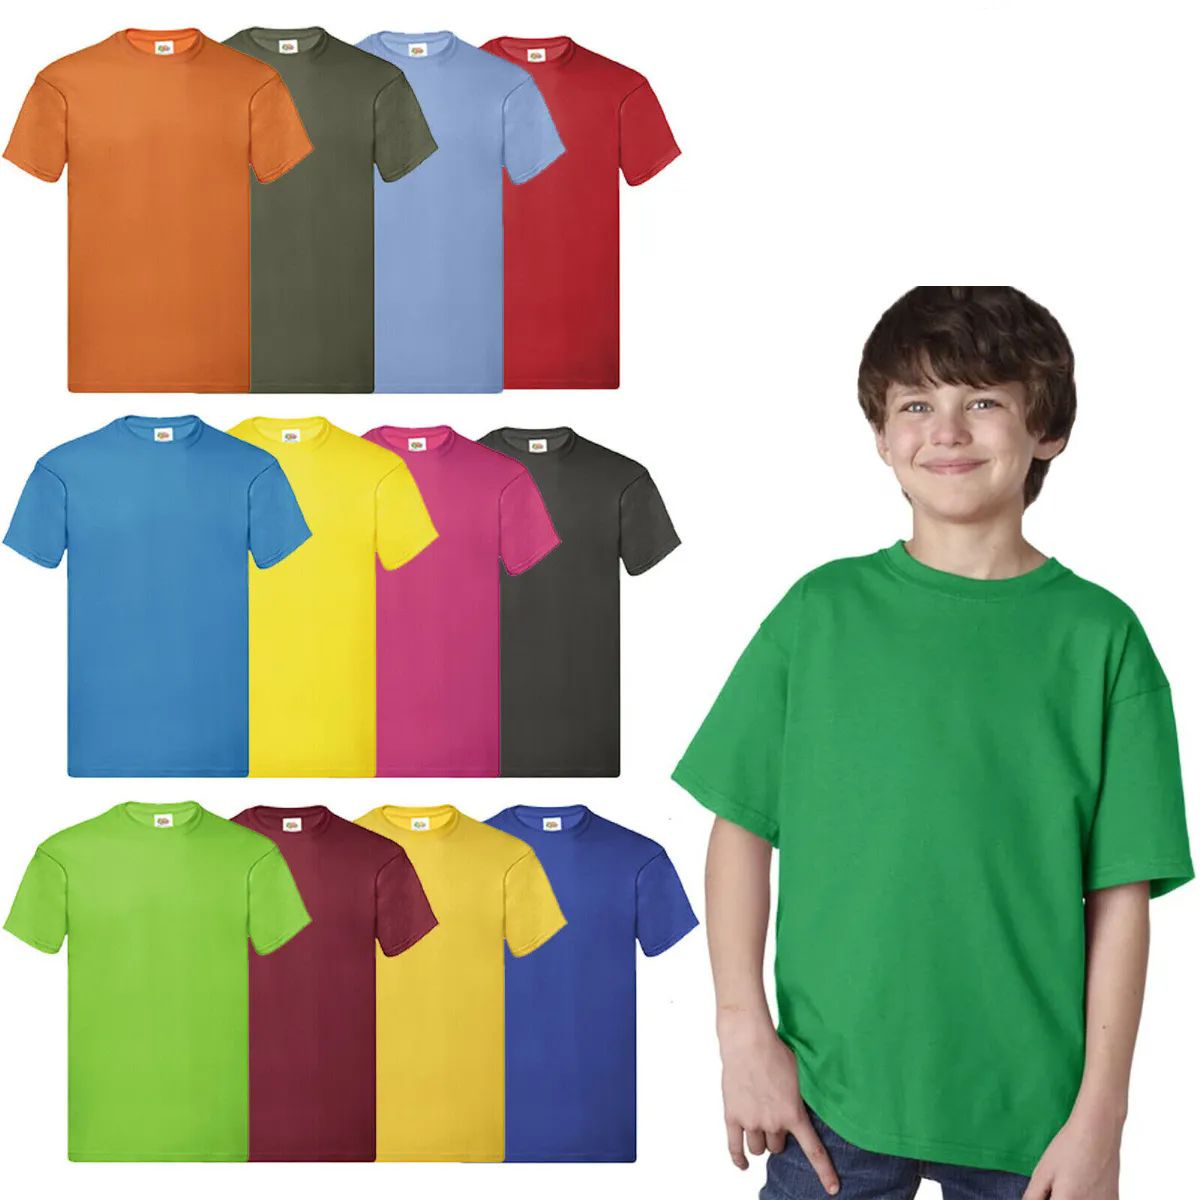 360 Pieces of Billion Hats Kids Youth Cotton Assorted Colors T Shirts Size M